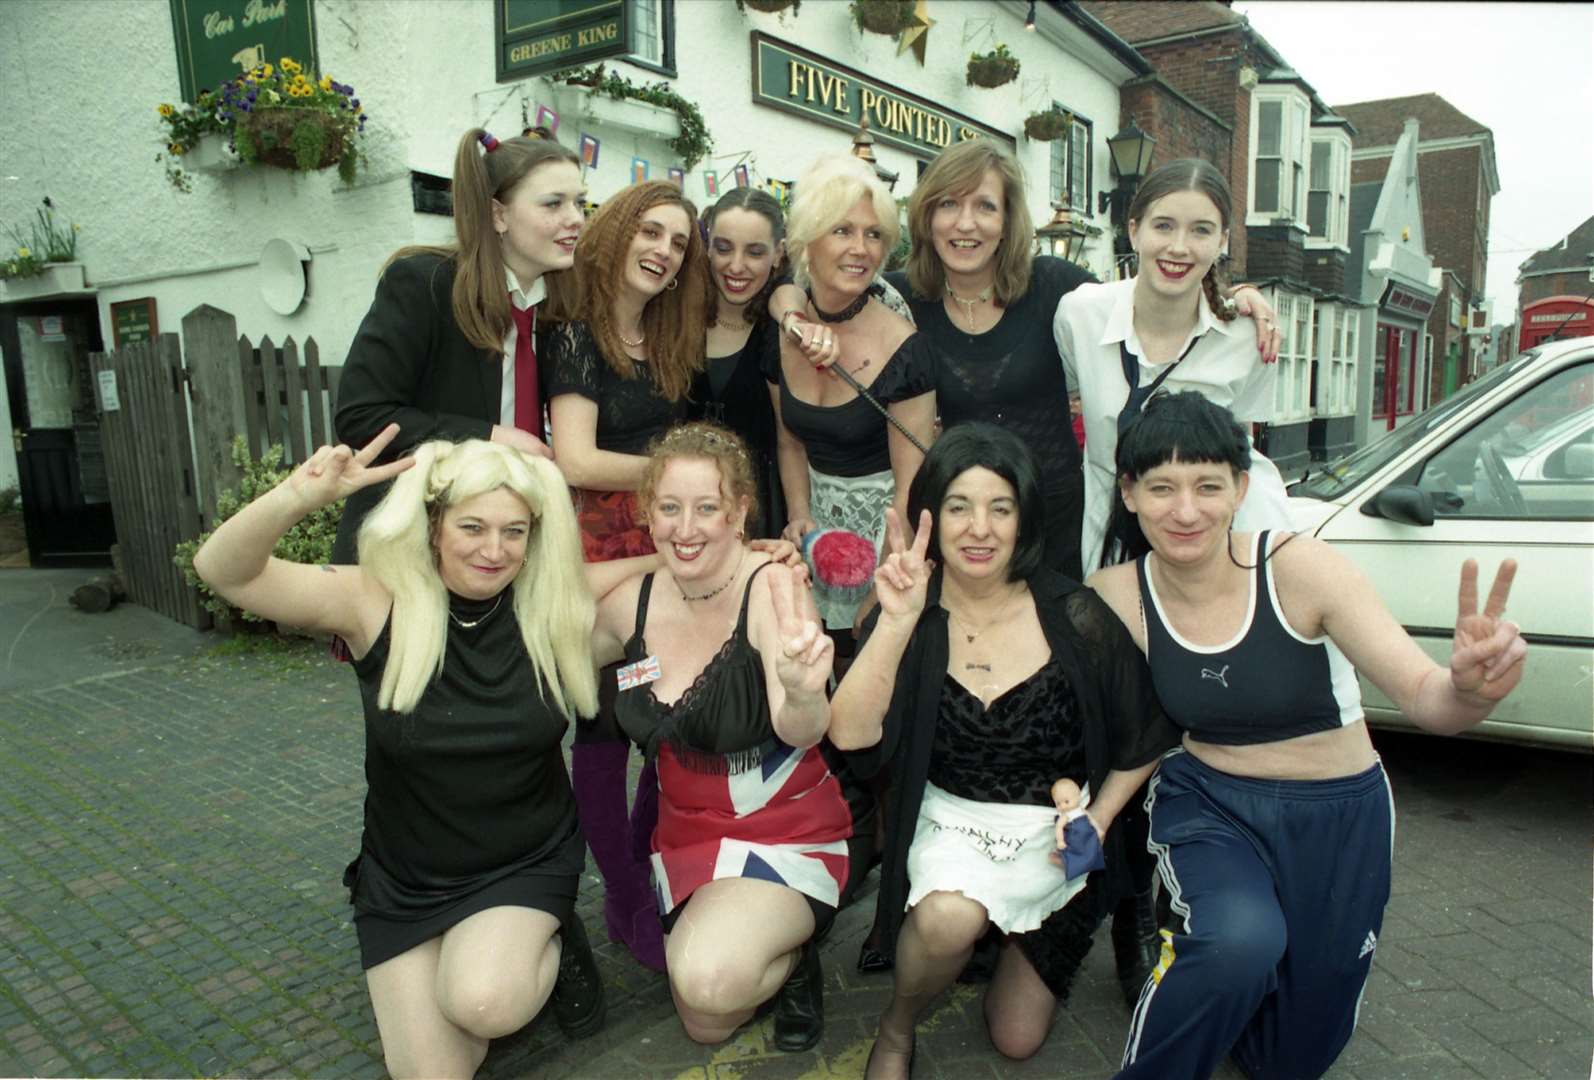 Staff at the Five Pointed Star pub in West Malling dressed up as the Spice Girls for Comic Relief in March 1999